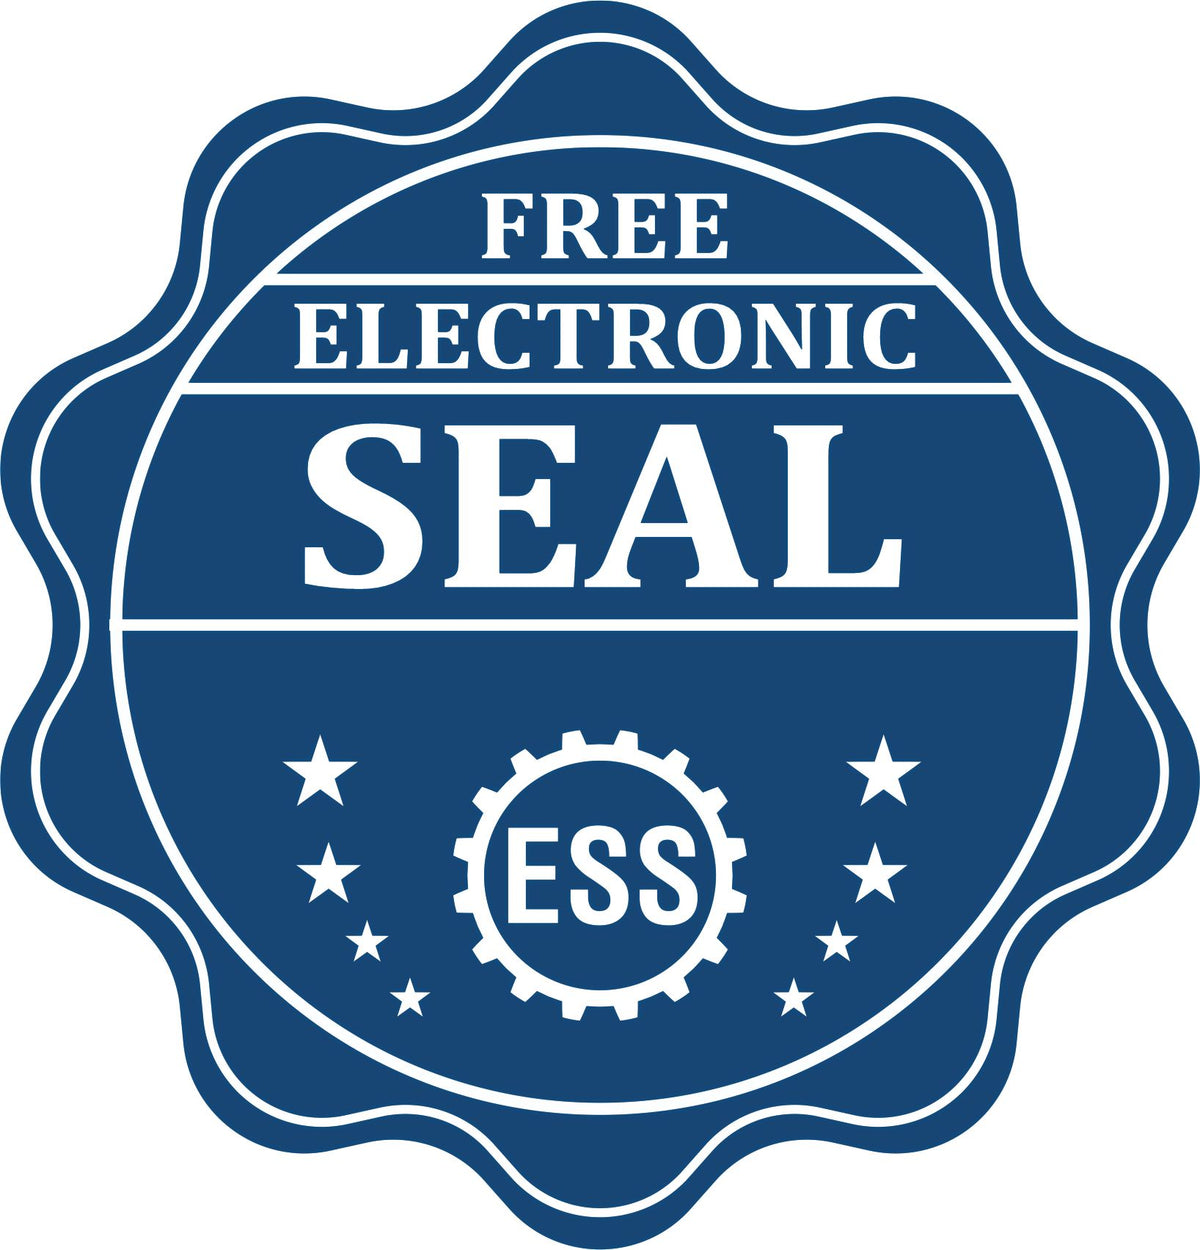 A badge showing a free electronic seal for the Slim Pre-Inked Hawaii Landscape Architect Seal Stamp with stars and the ESS gear on the emblem.